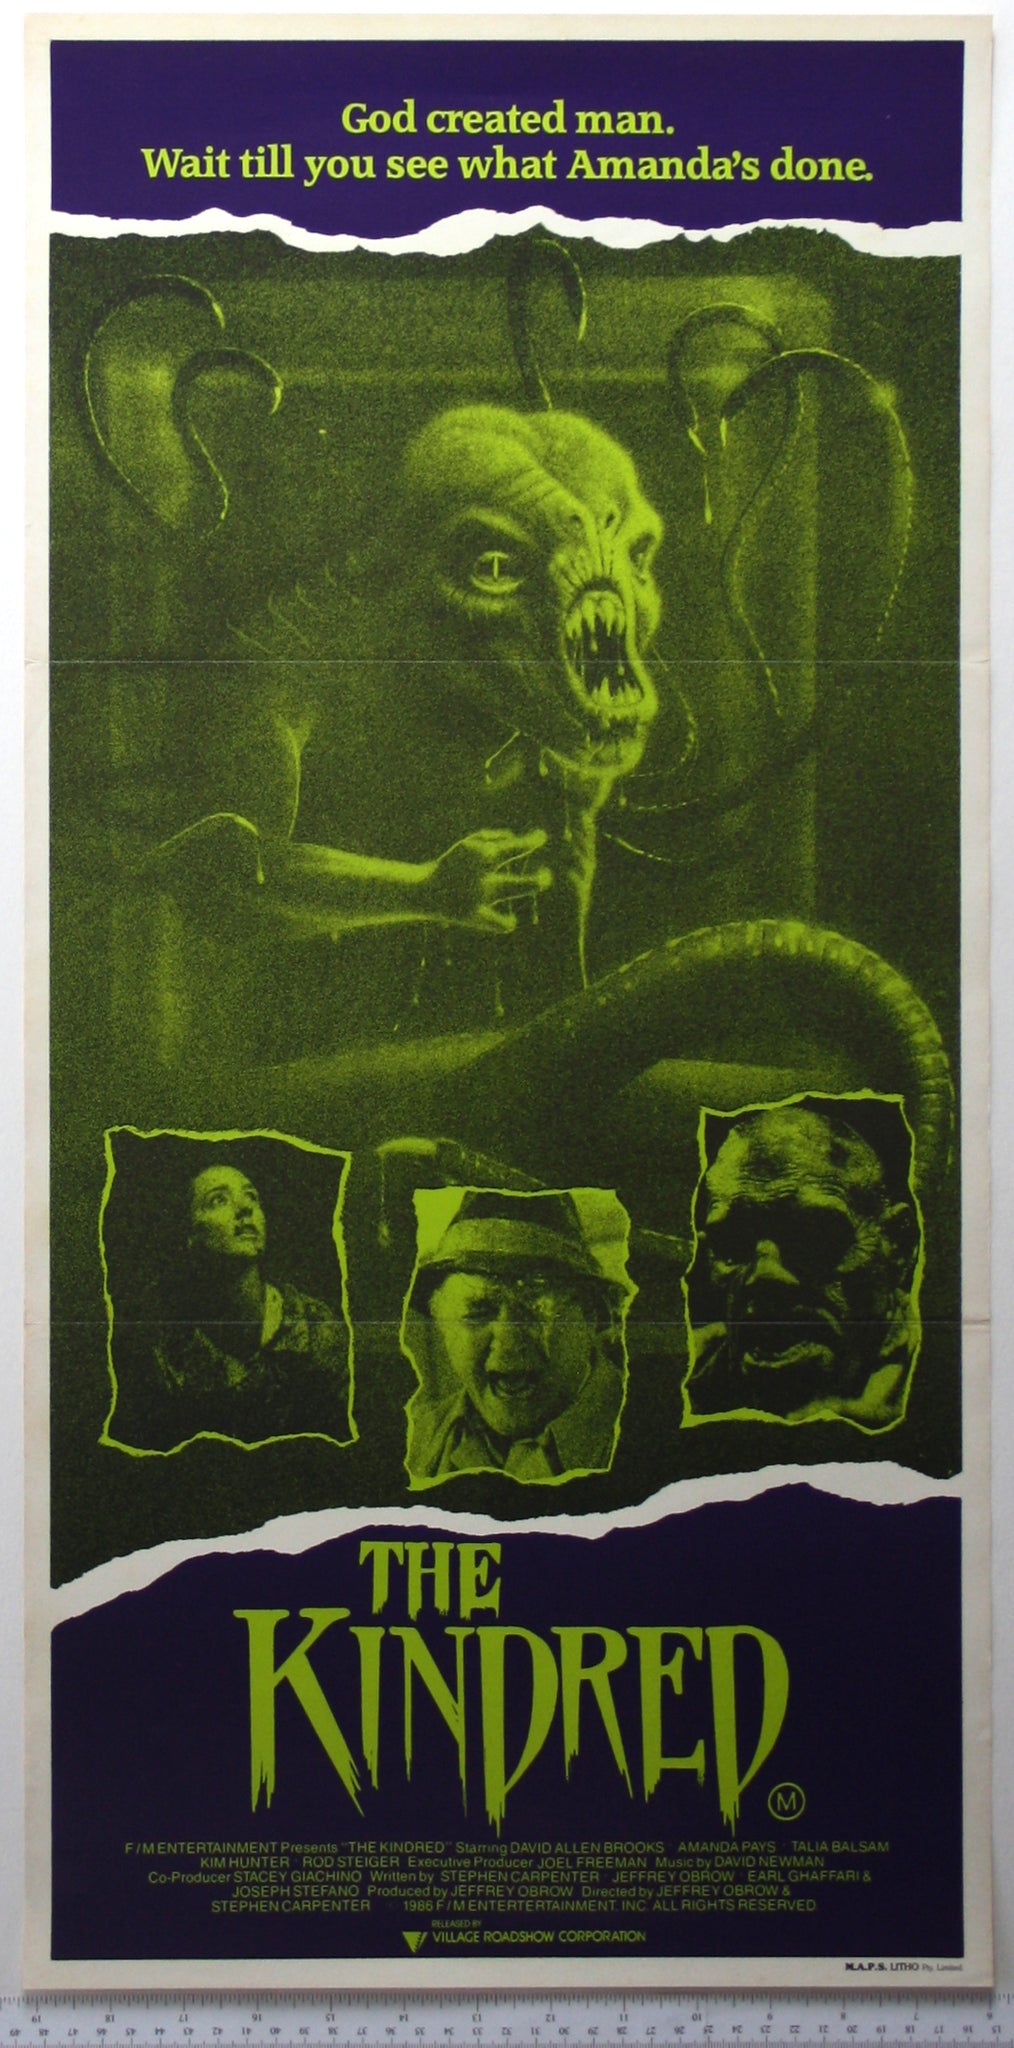 Green hued artwork of monstrous tentacled creature, with ragged insets of lead actors.